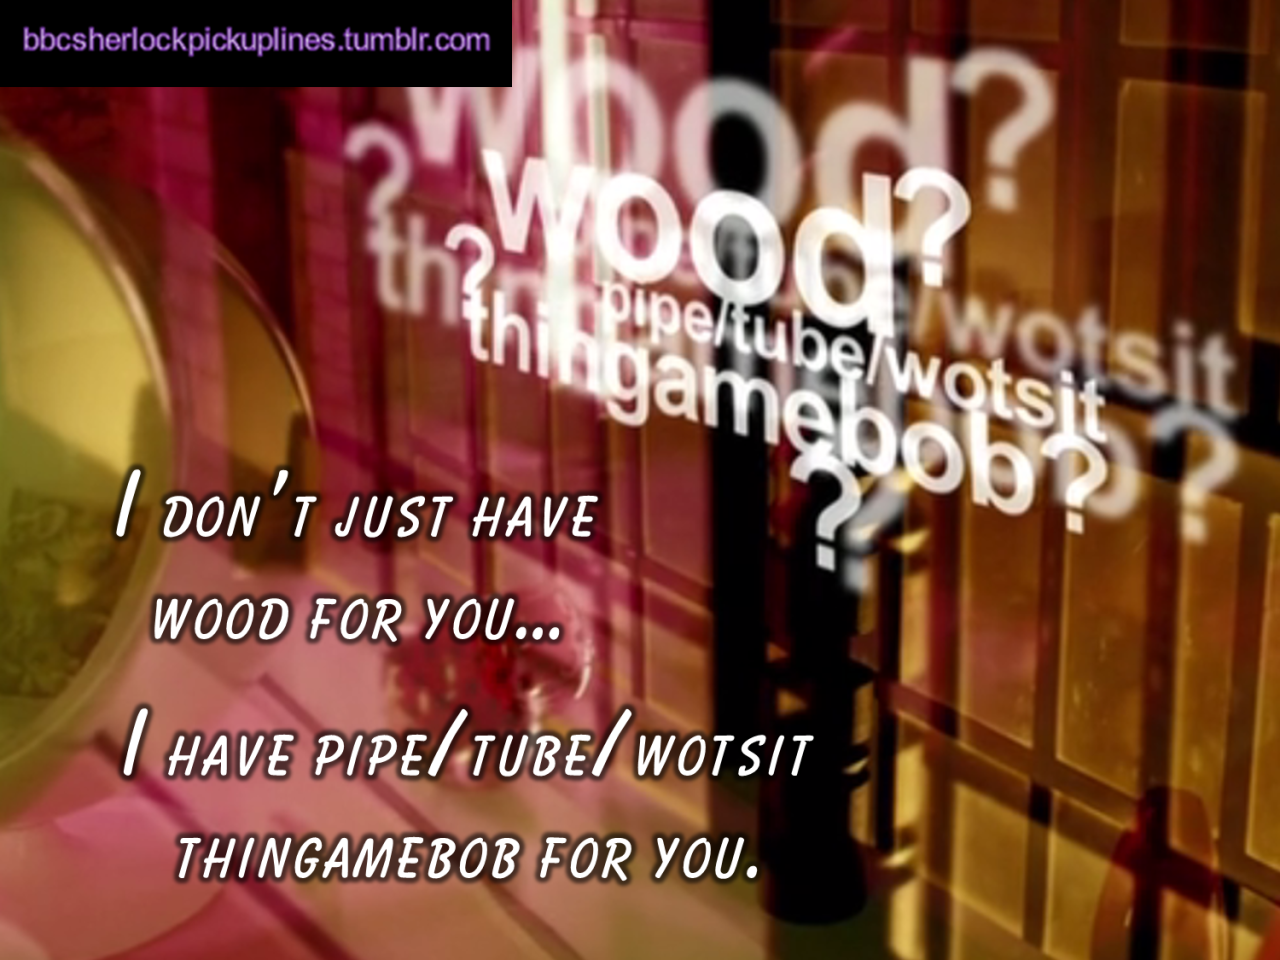 &ldquo;I don&rsquo;t just have wood for you&hellip; I have pipe/tube/wotsit